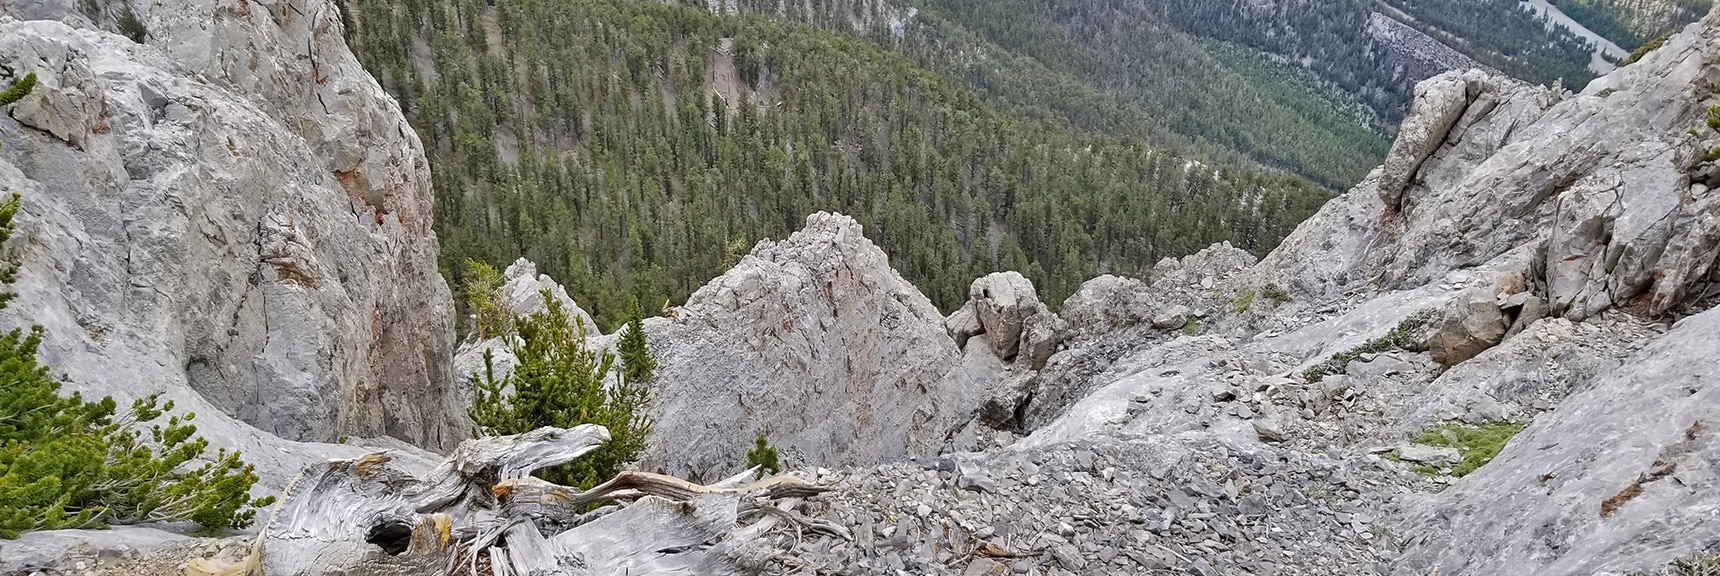 Looking Over the Ledge Down Mummy's NW Cliffs | Mummy Mountain NW Cliffs | Mt Charleston Wilderness | Spring Mountains, Nevada